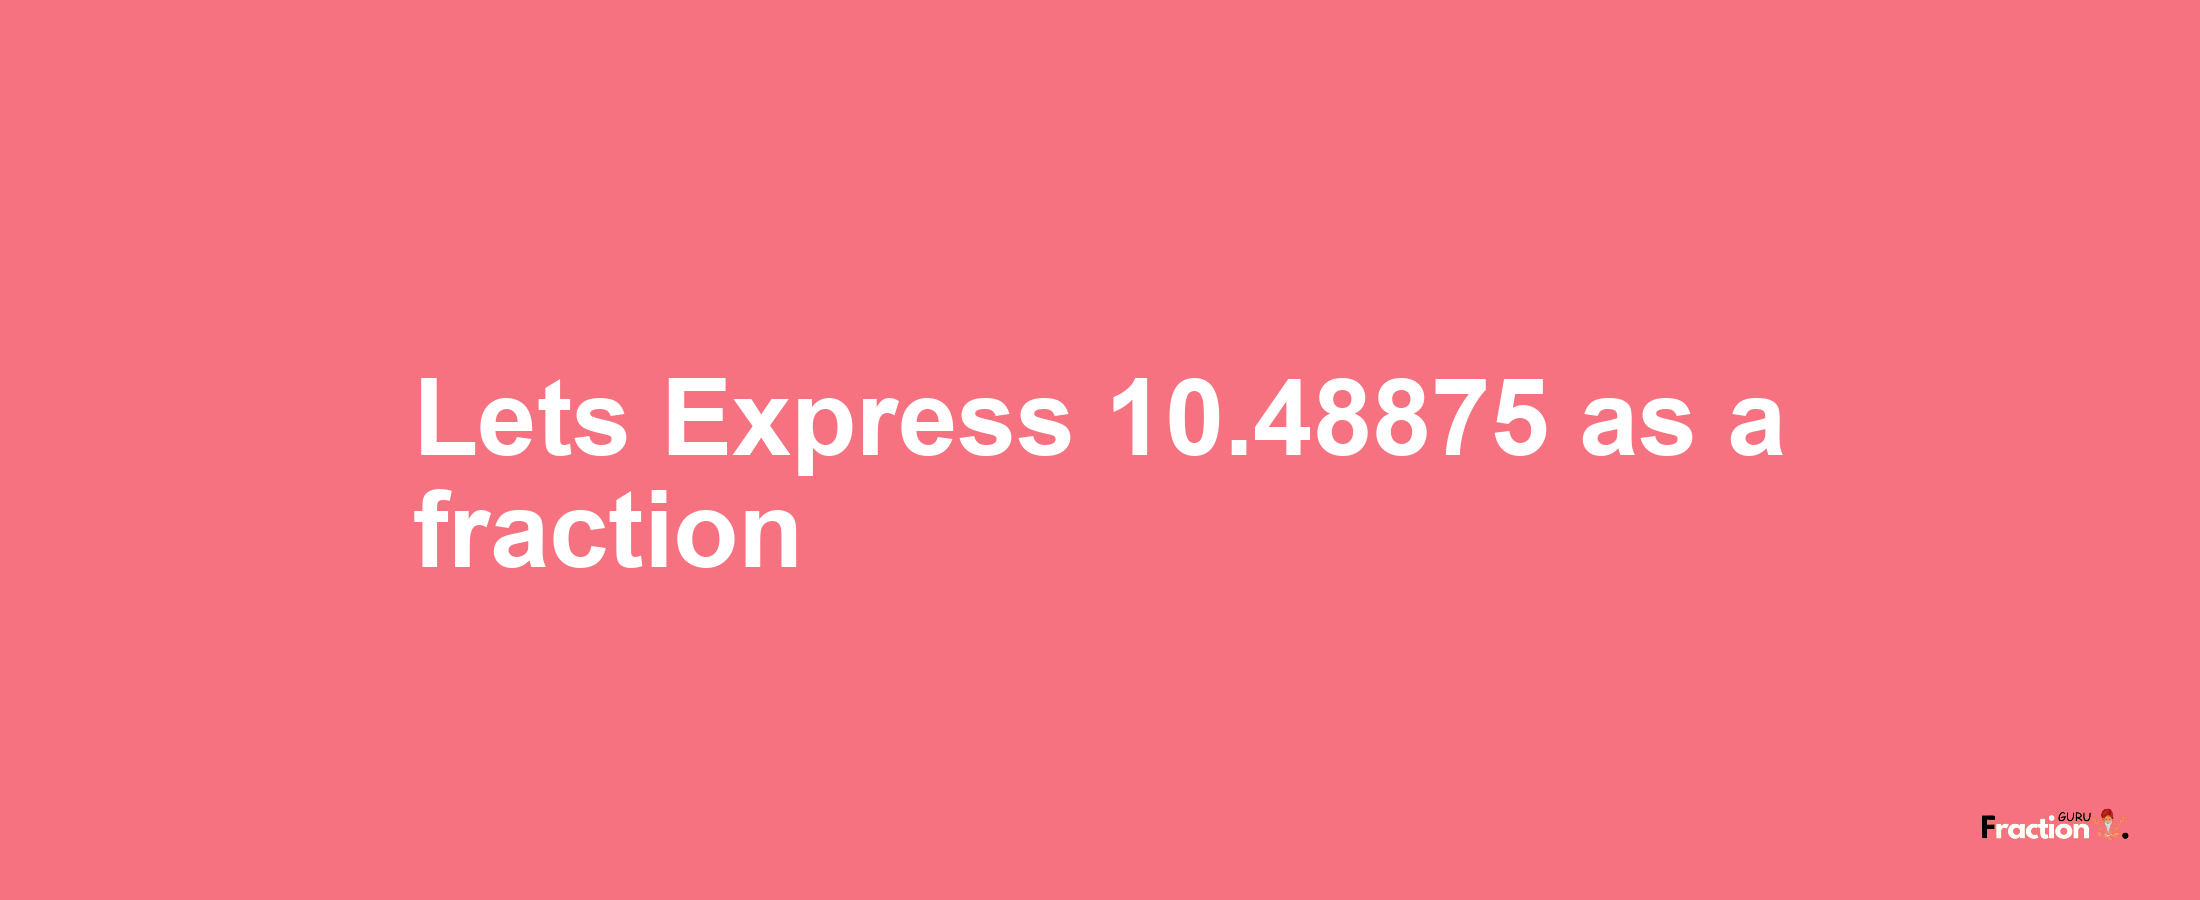 Lets Express 10.48875 as afraction